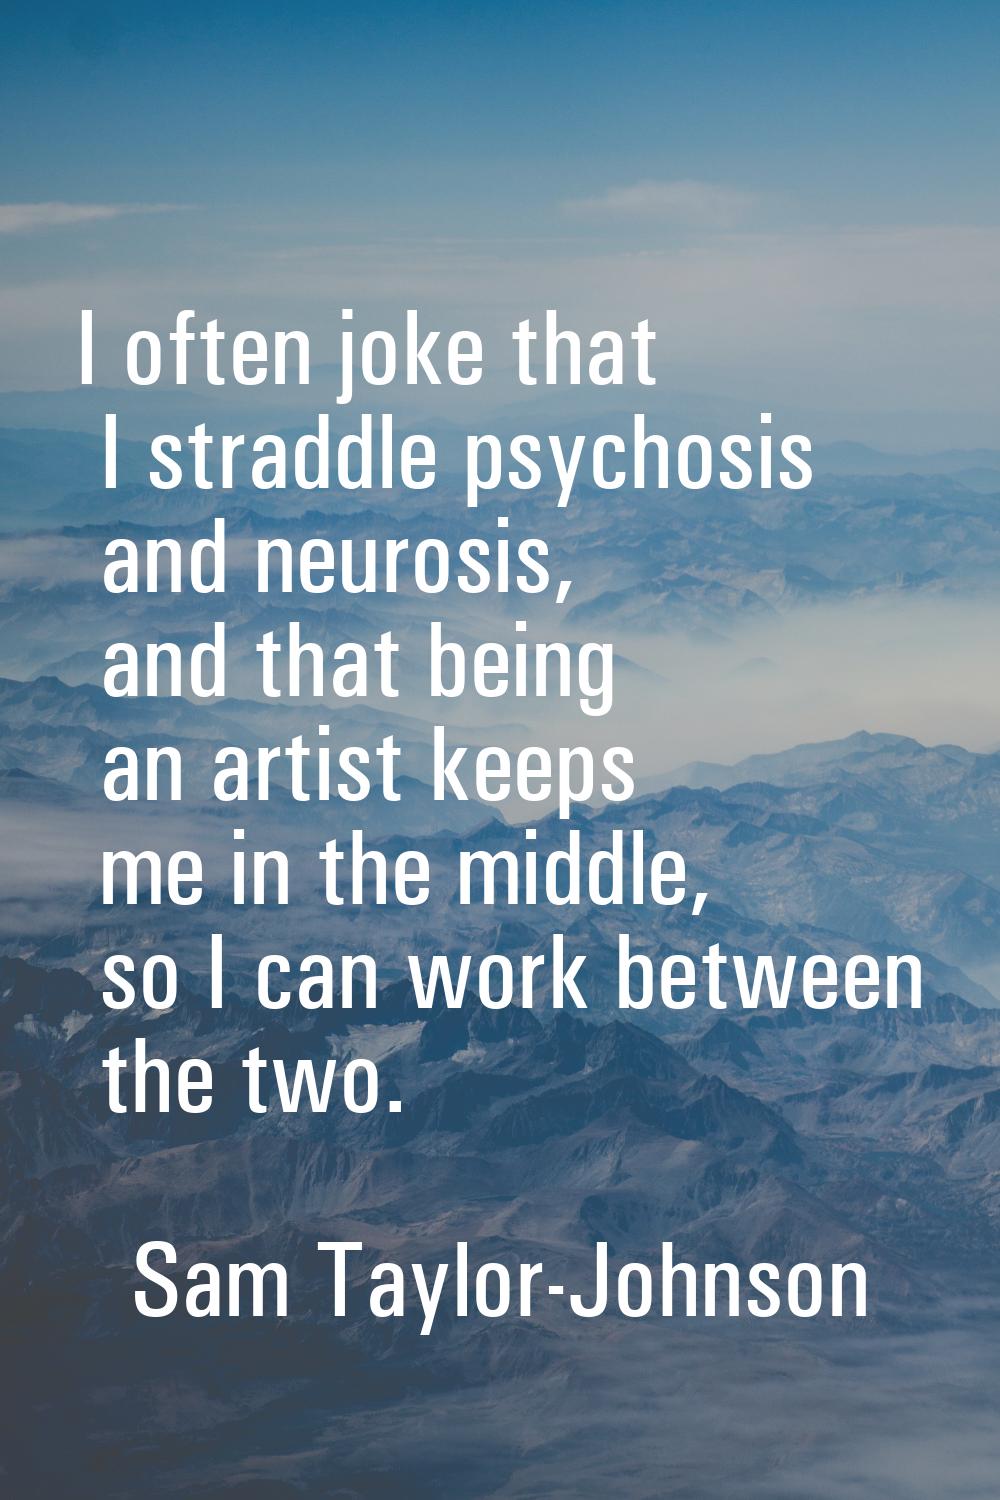 I often joke that I straddle psychosis and neurosis, and that being an artist keeps me in the middl